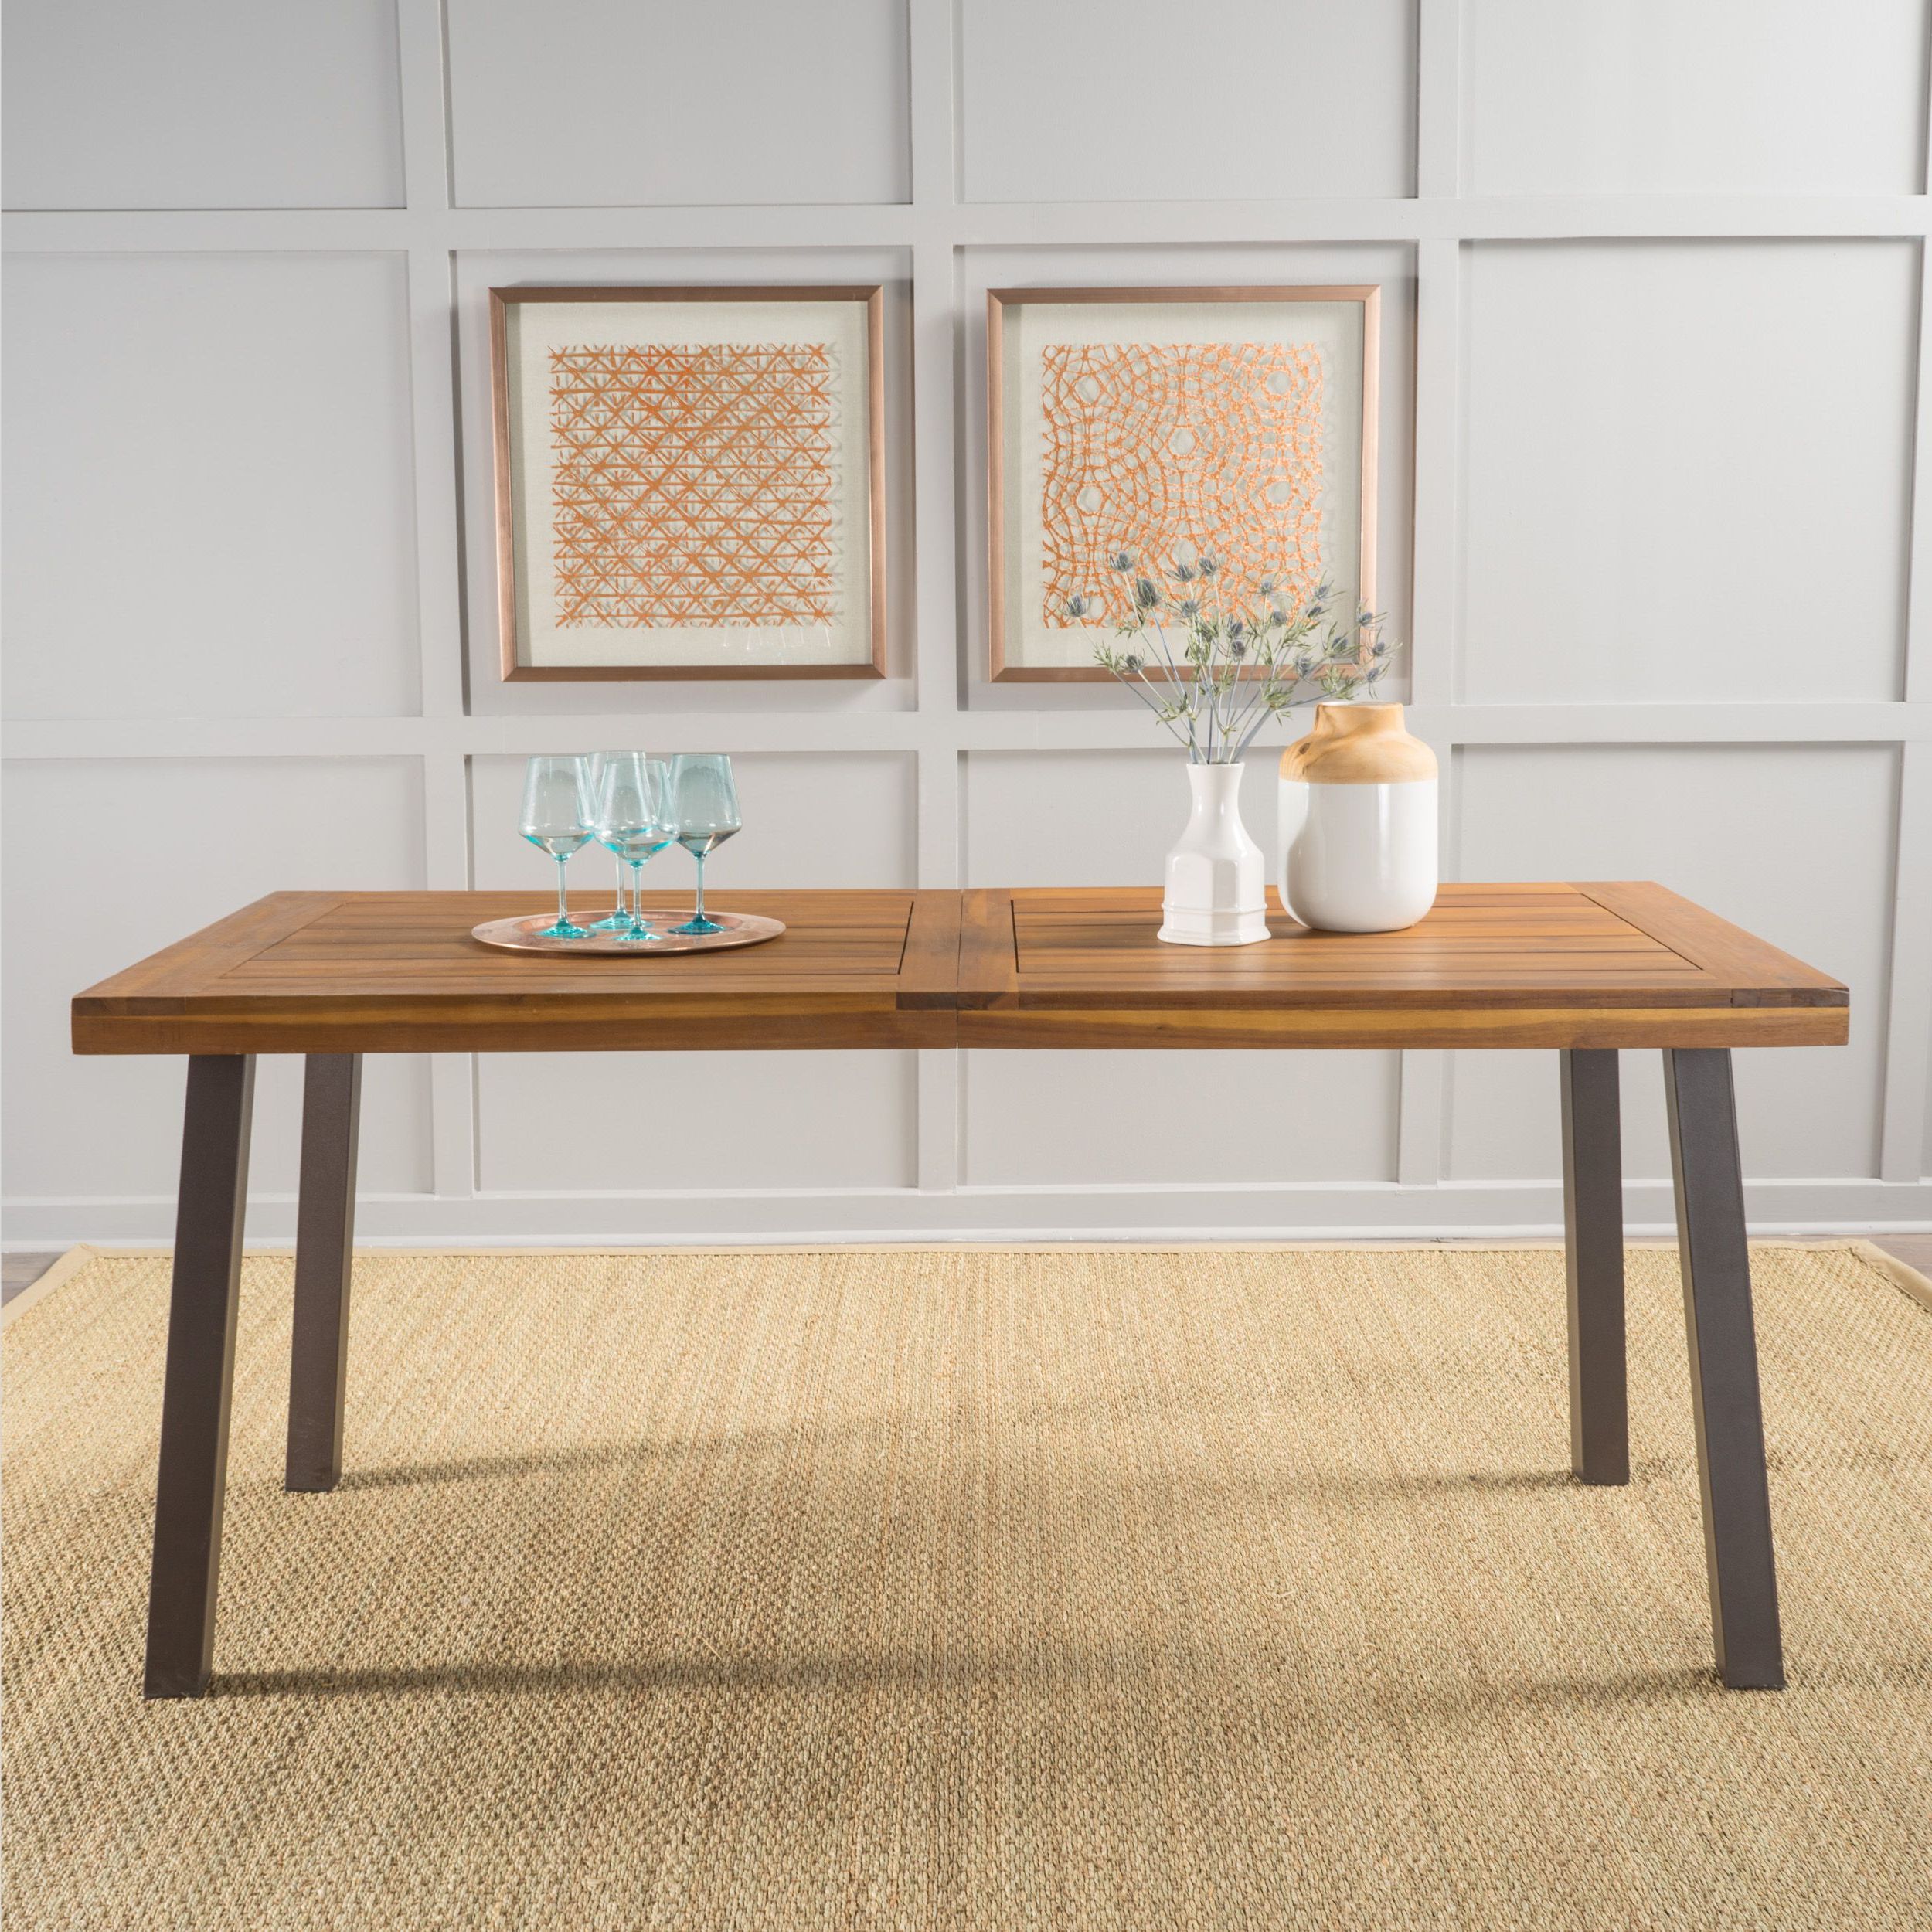 Medium Elegant Dining Tables With Best And Newest The 8 Best Dining Room Tables At Walmart In  (View 14 of 25)